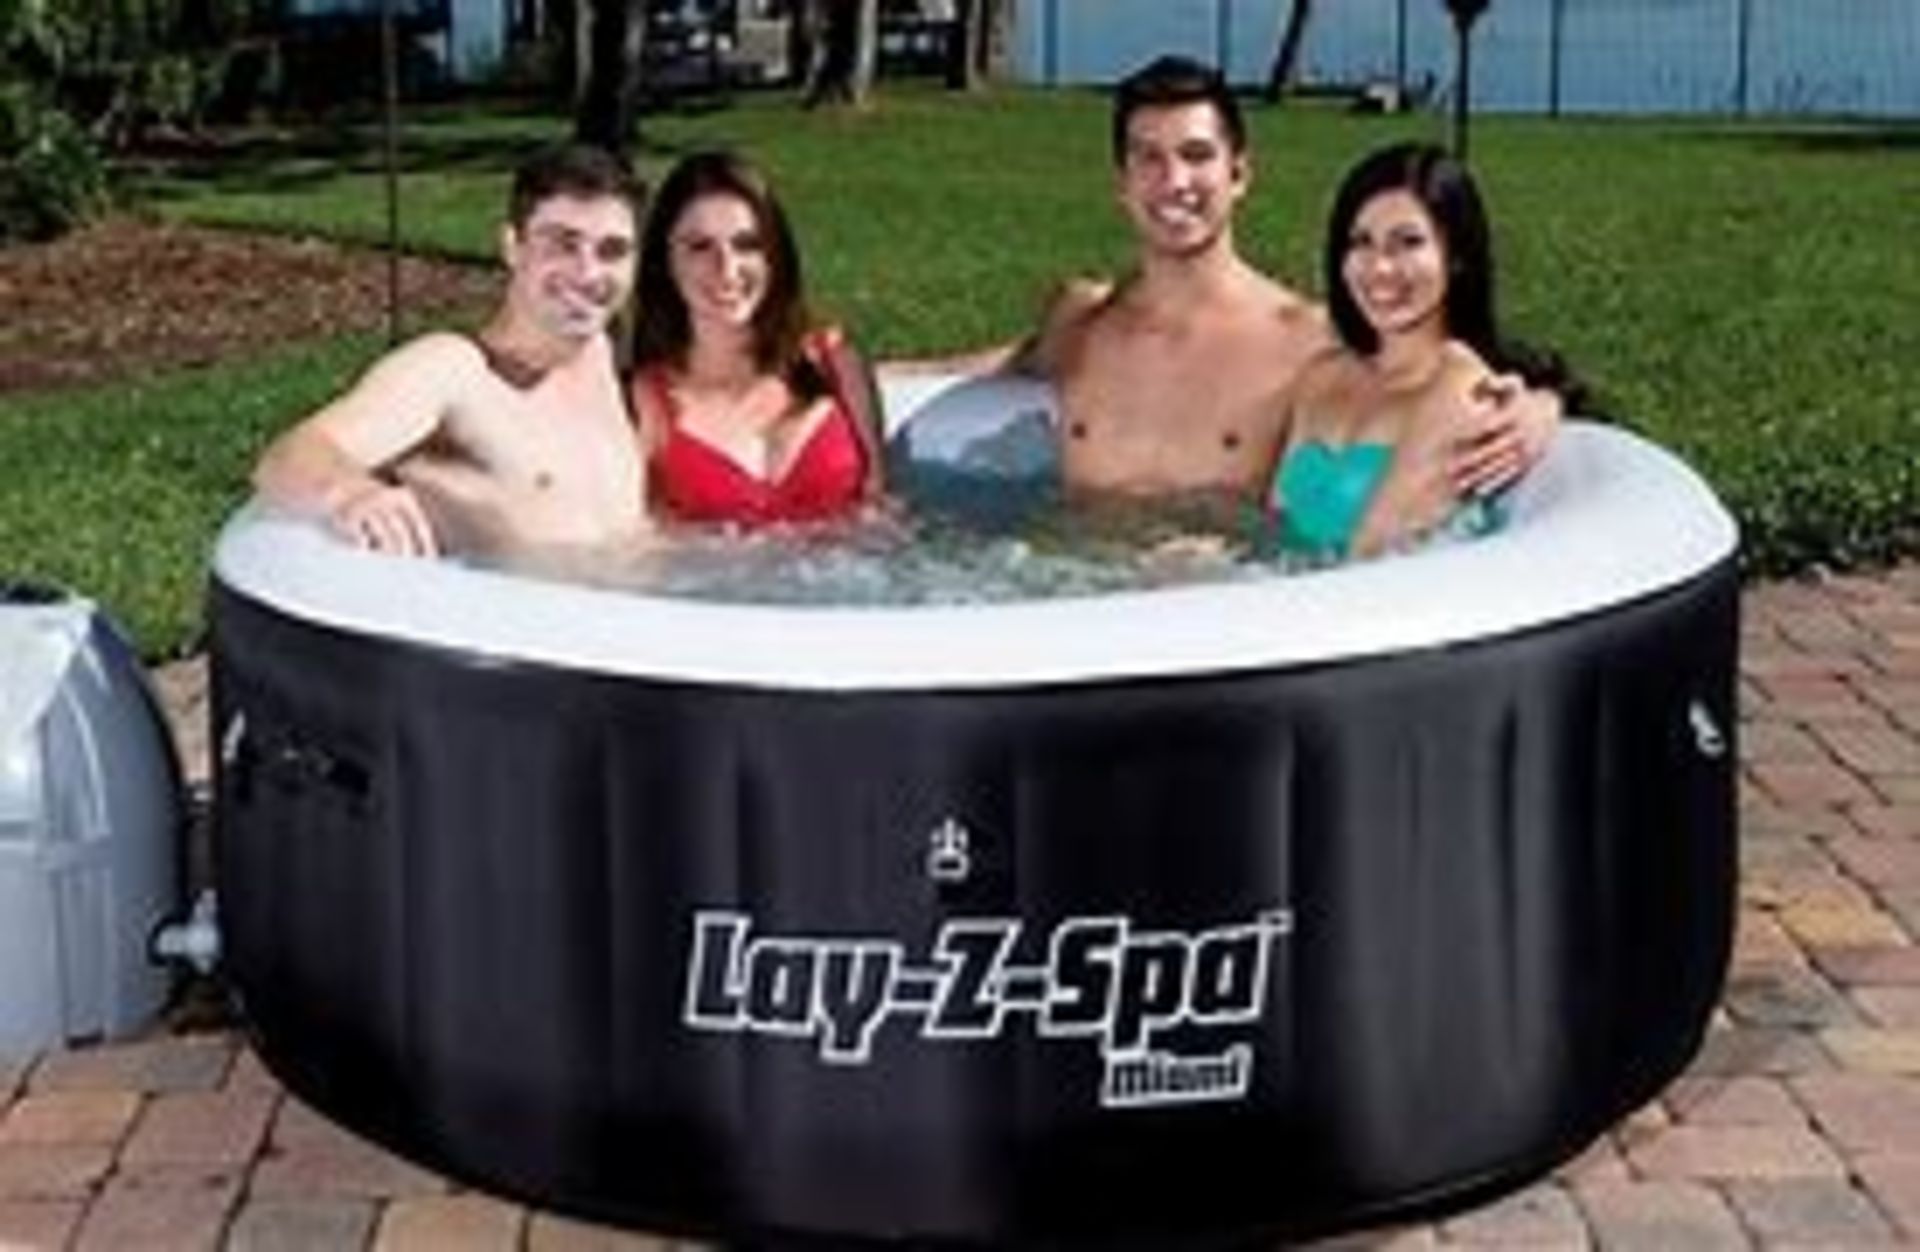 1 X BRAND NEW LAY-Z-SPA MIAMI PORTABLE SPA - AIR JET SYSTEM - WITH DIGITAL CONTROL PANEL -120 BUBBLE